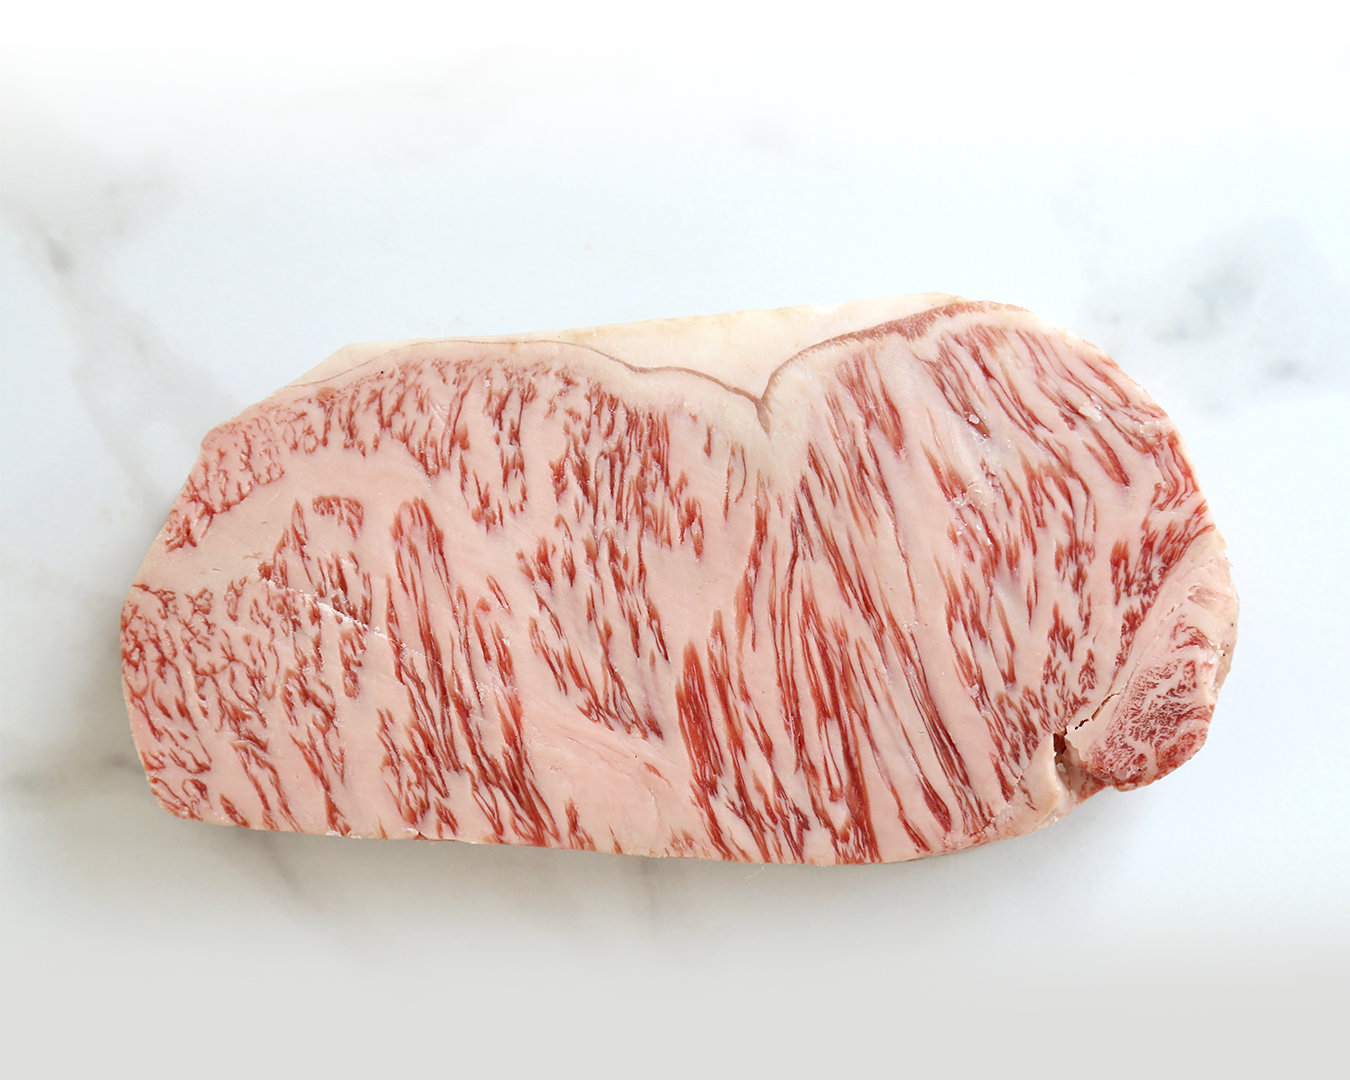 A5 Japanese Wagyu Beef NY Strip Steak — Fairway Packing